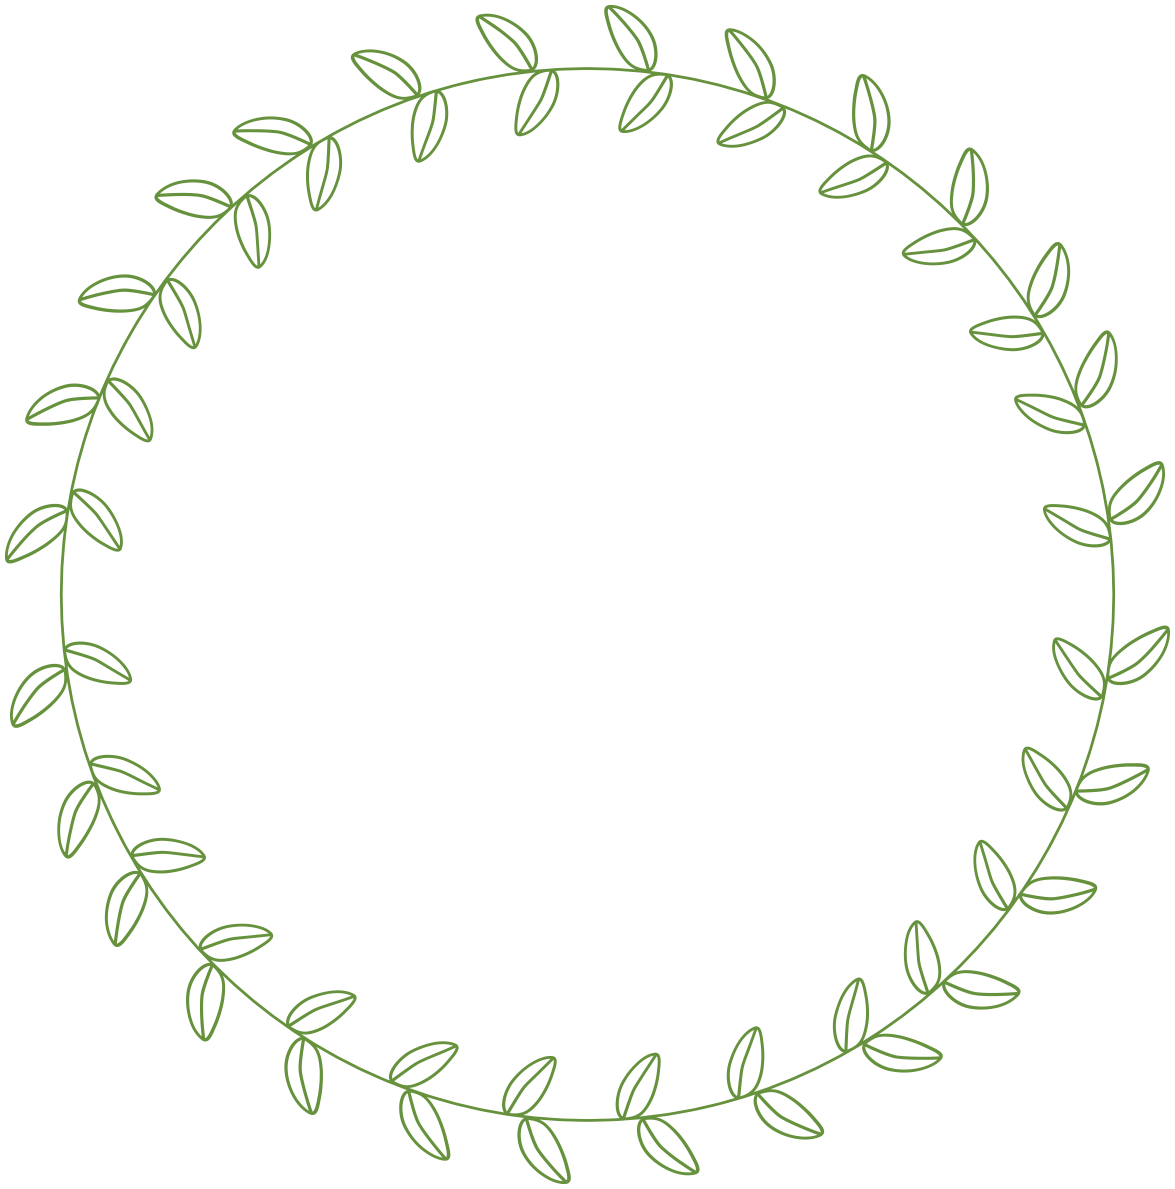 Download PNG image - Round Frame PNG Pic 